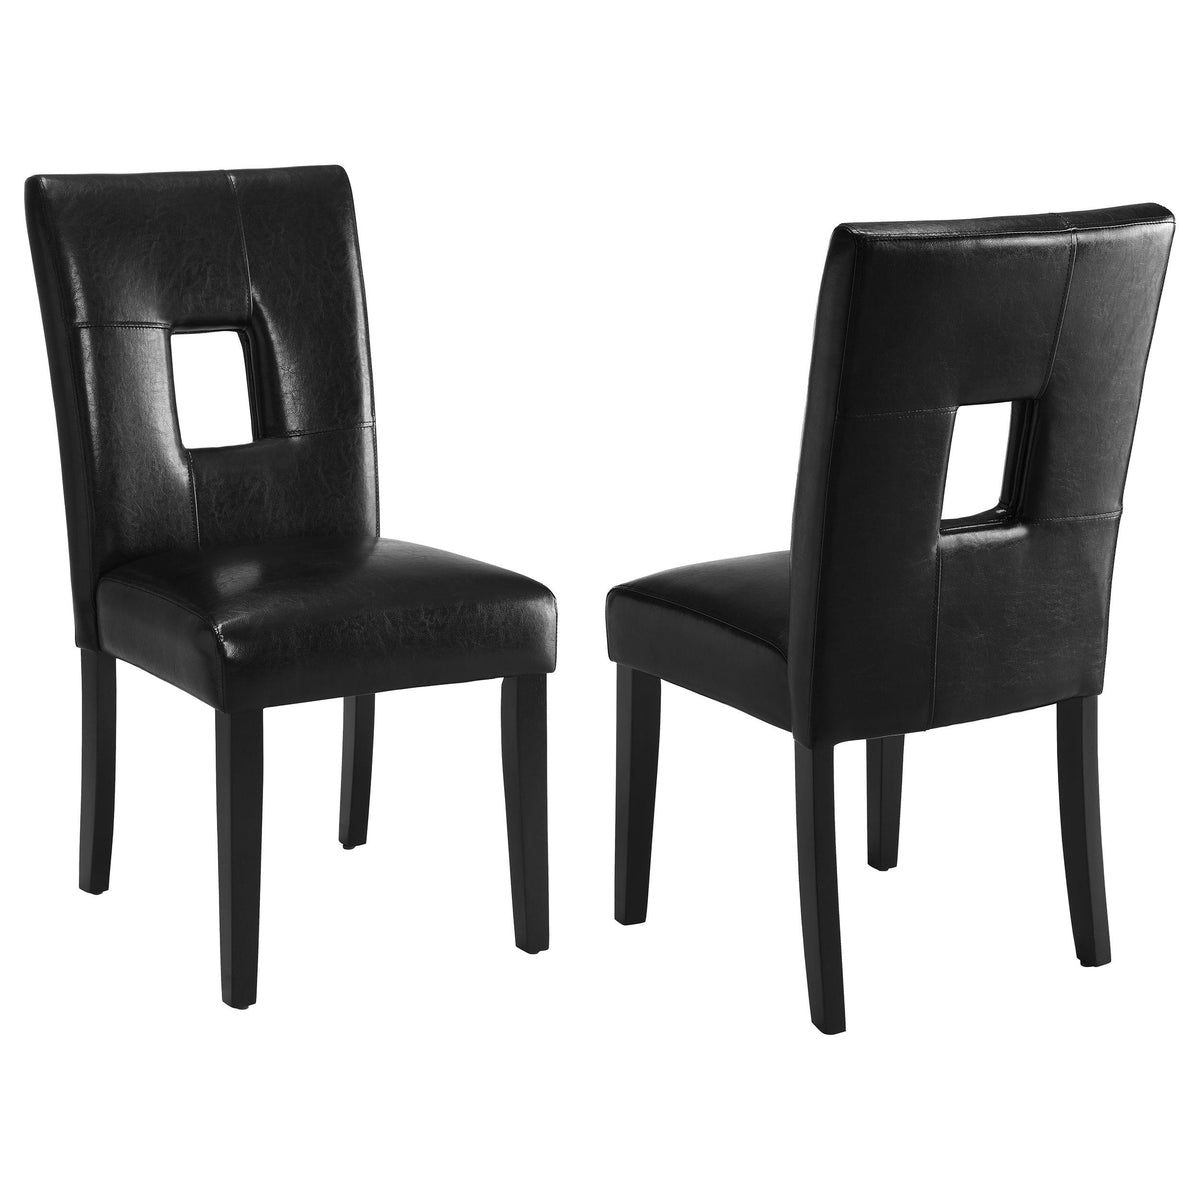 Shannon Open Back Upholstered Dining Chairs Black (Set of 2)  Half Price Furniture